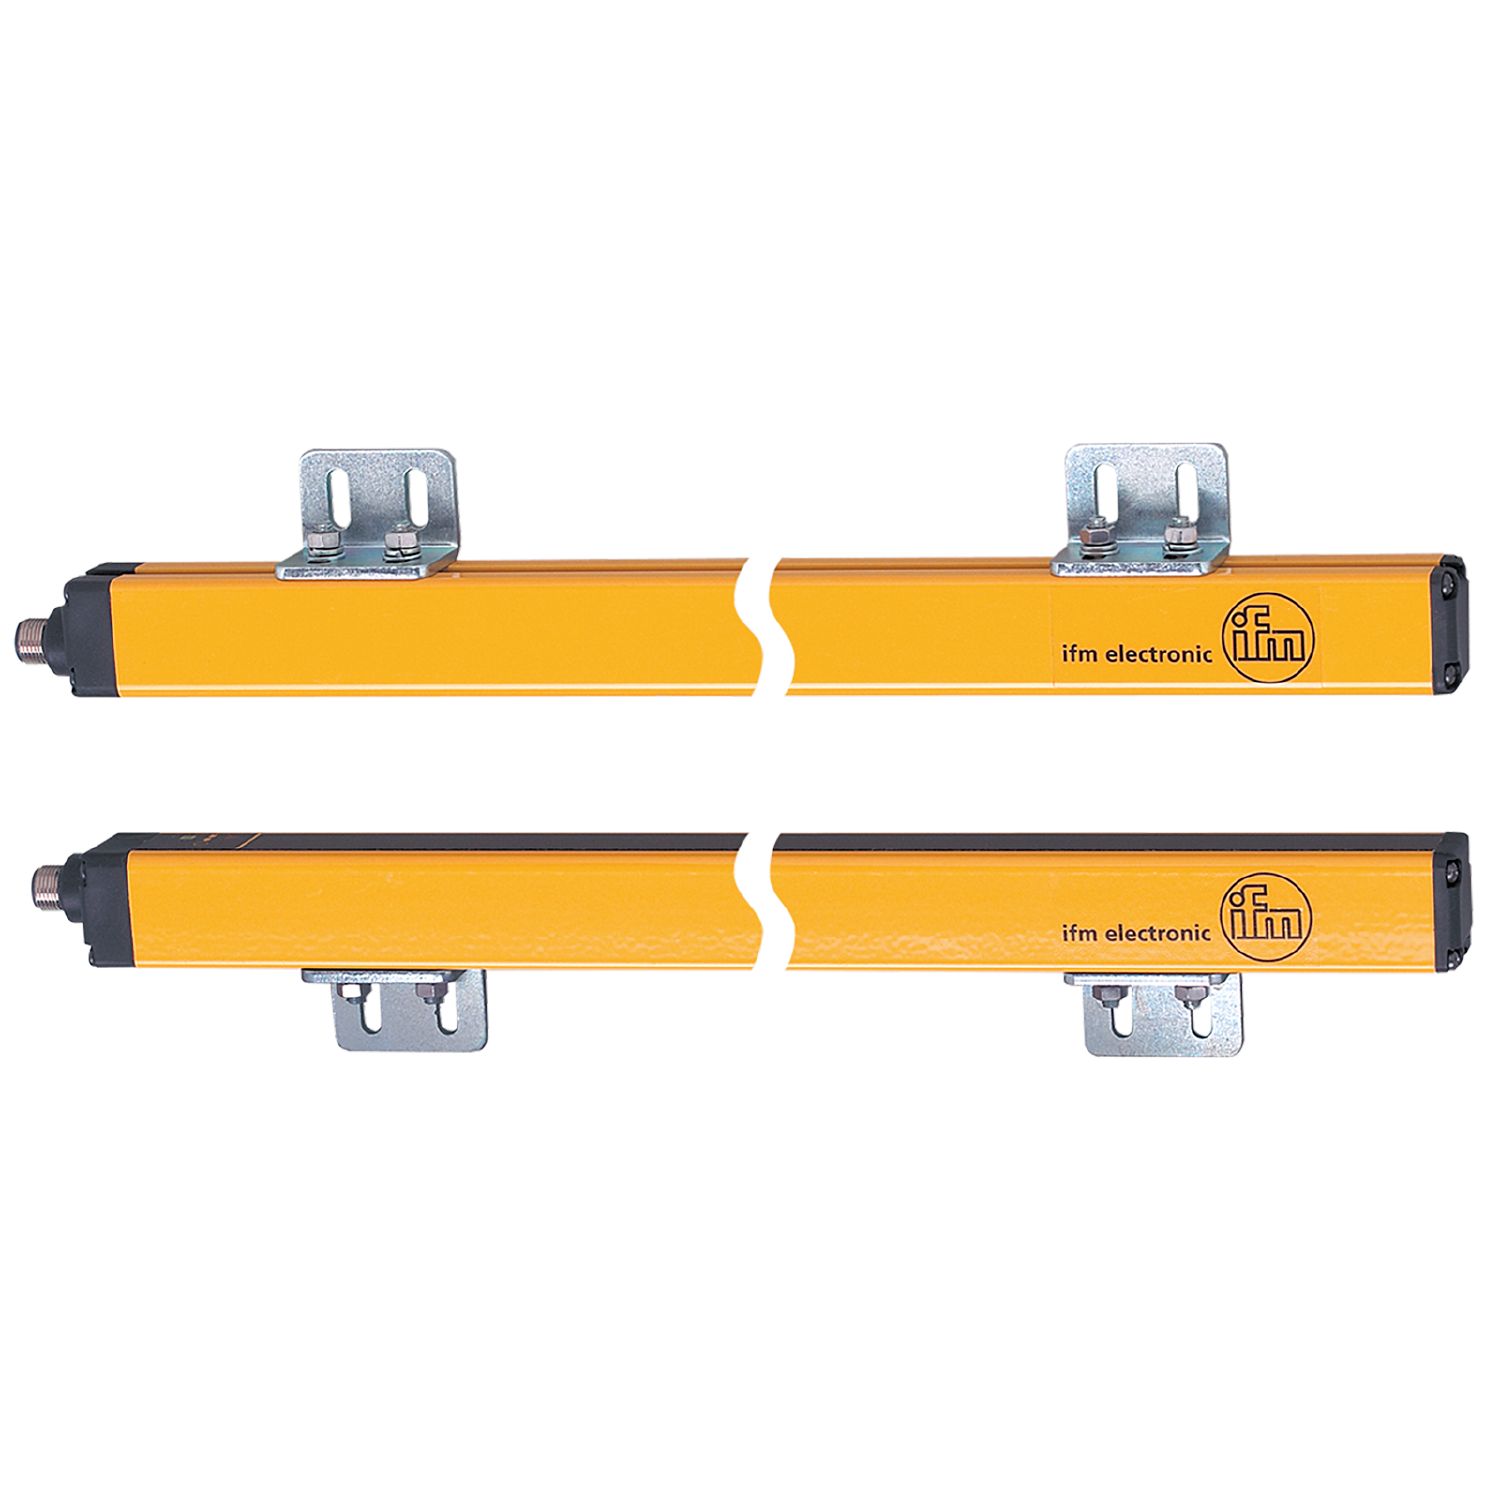 OY454S - Safety light curtain - ifm